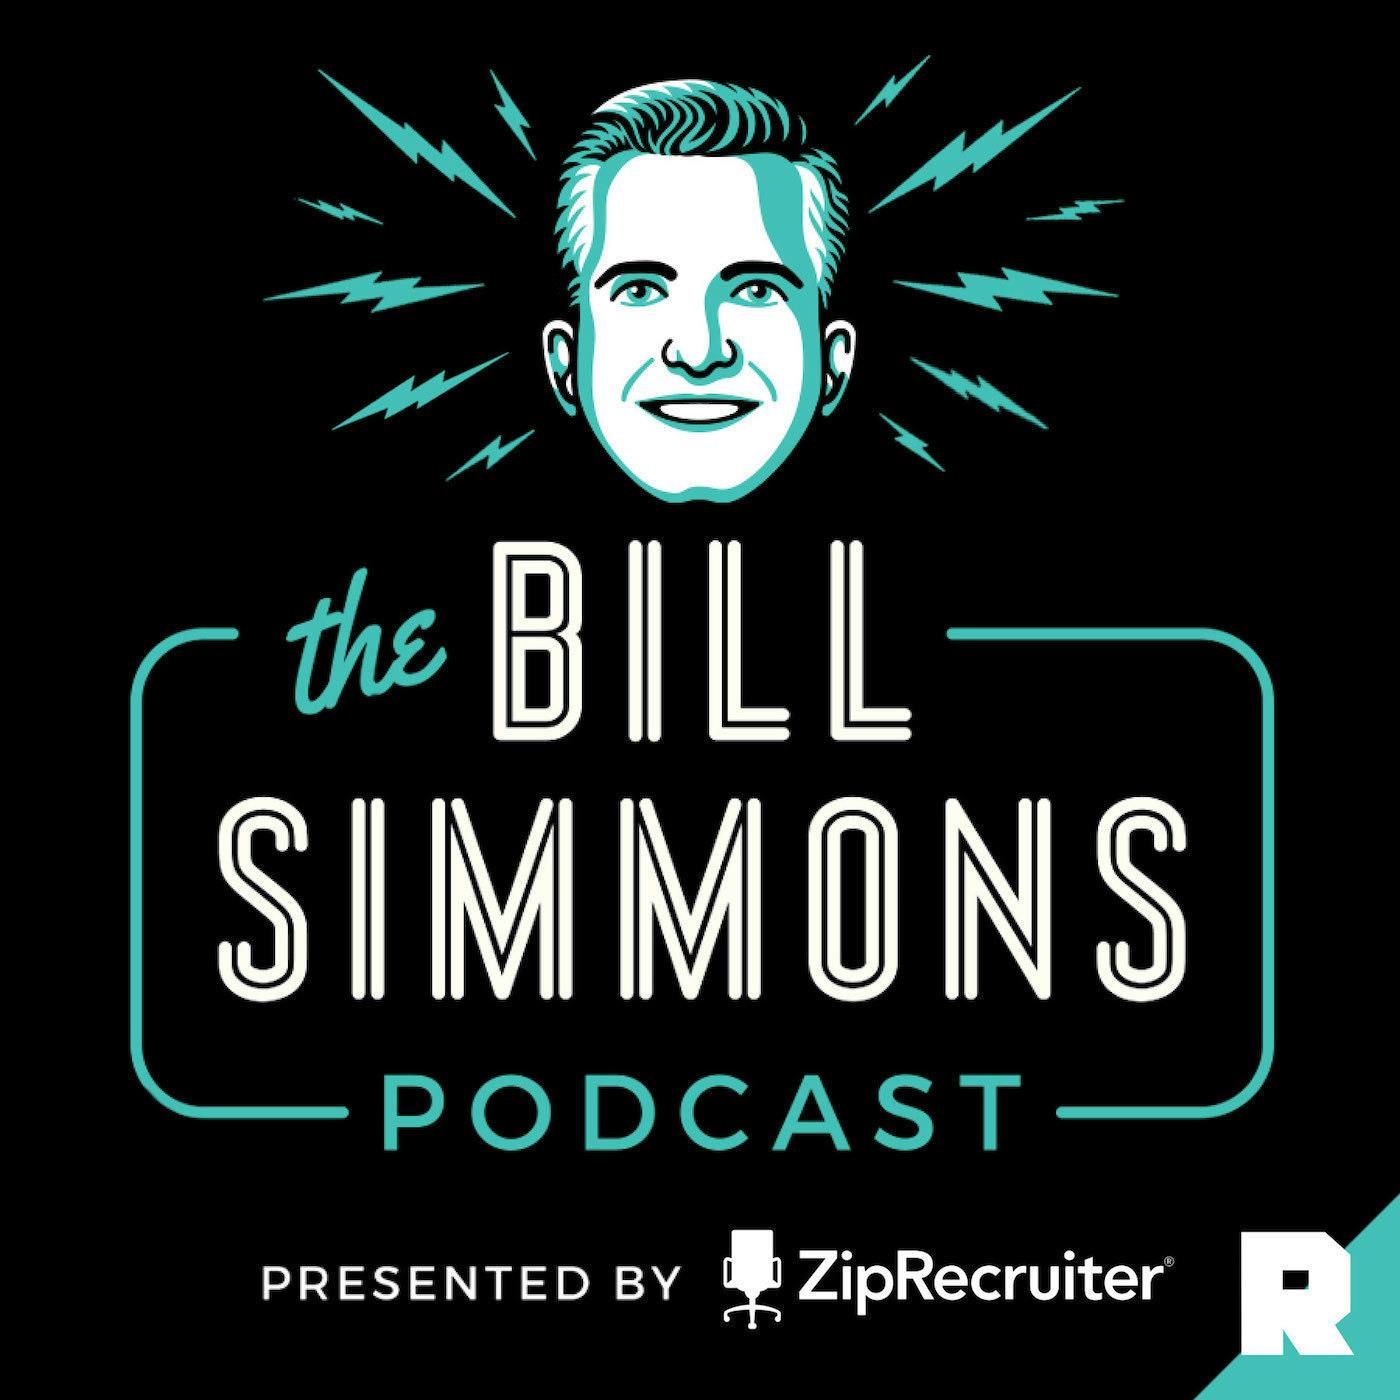 The Improbable Celtics, ’Cobra Kai,’ and Bank Robbery Movies With Bill’s Dad and Shea Serrano | The Bill Simmons Podcast (Ep. 366)